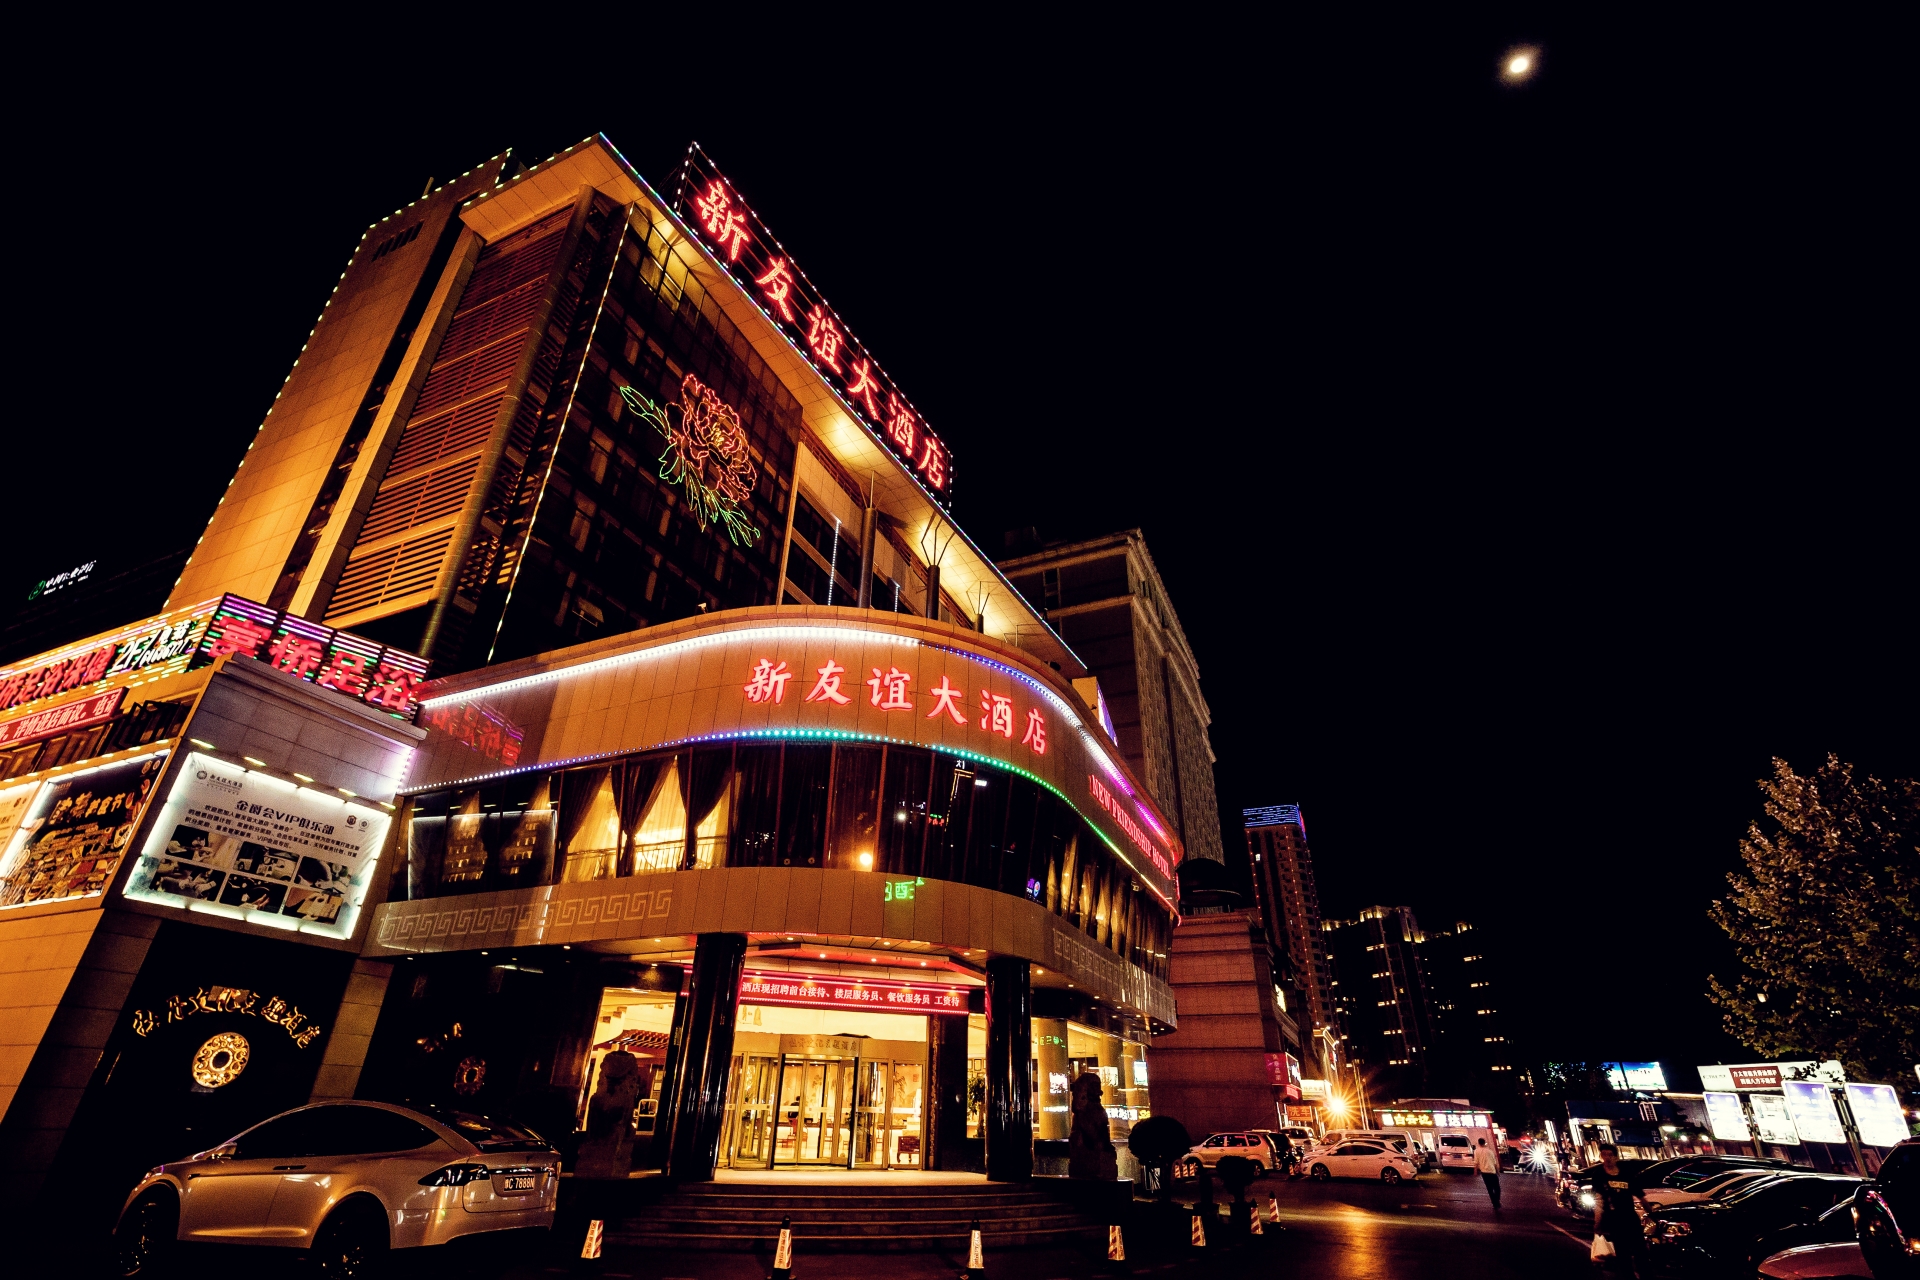 Luoyang New Friendship Hotel - Exterior 